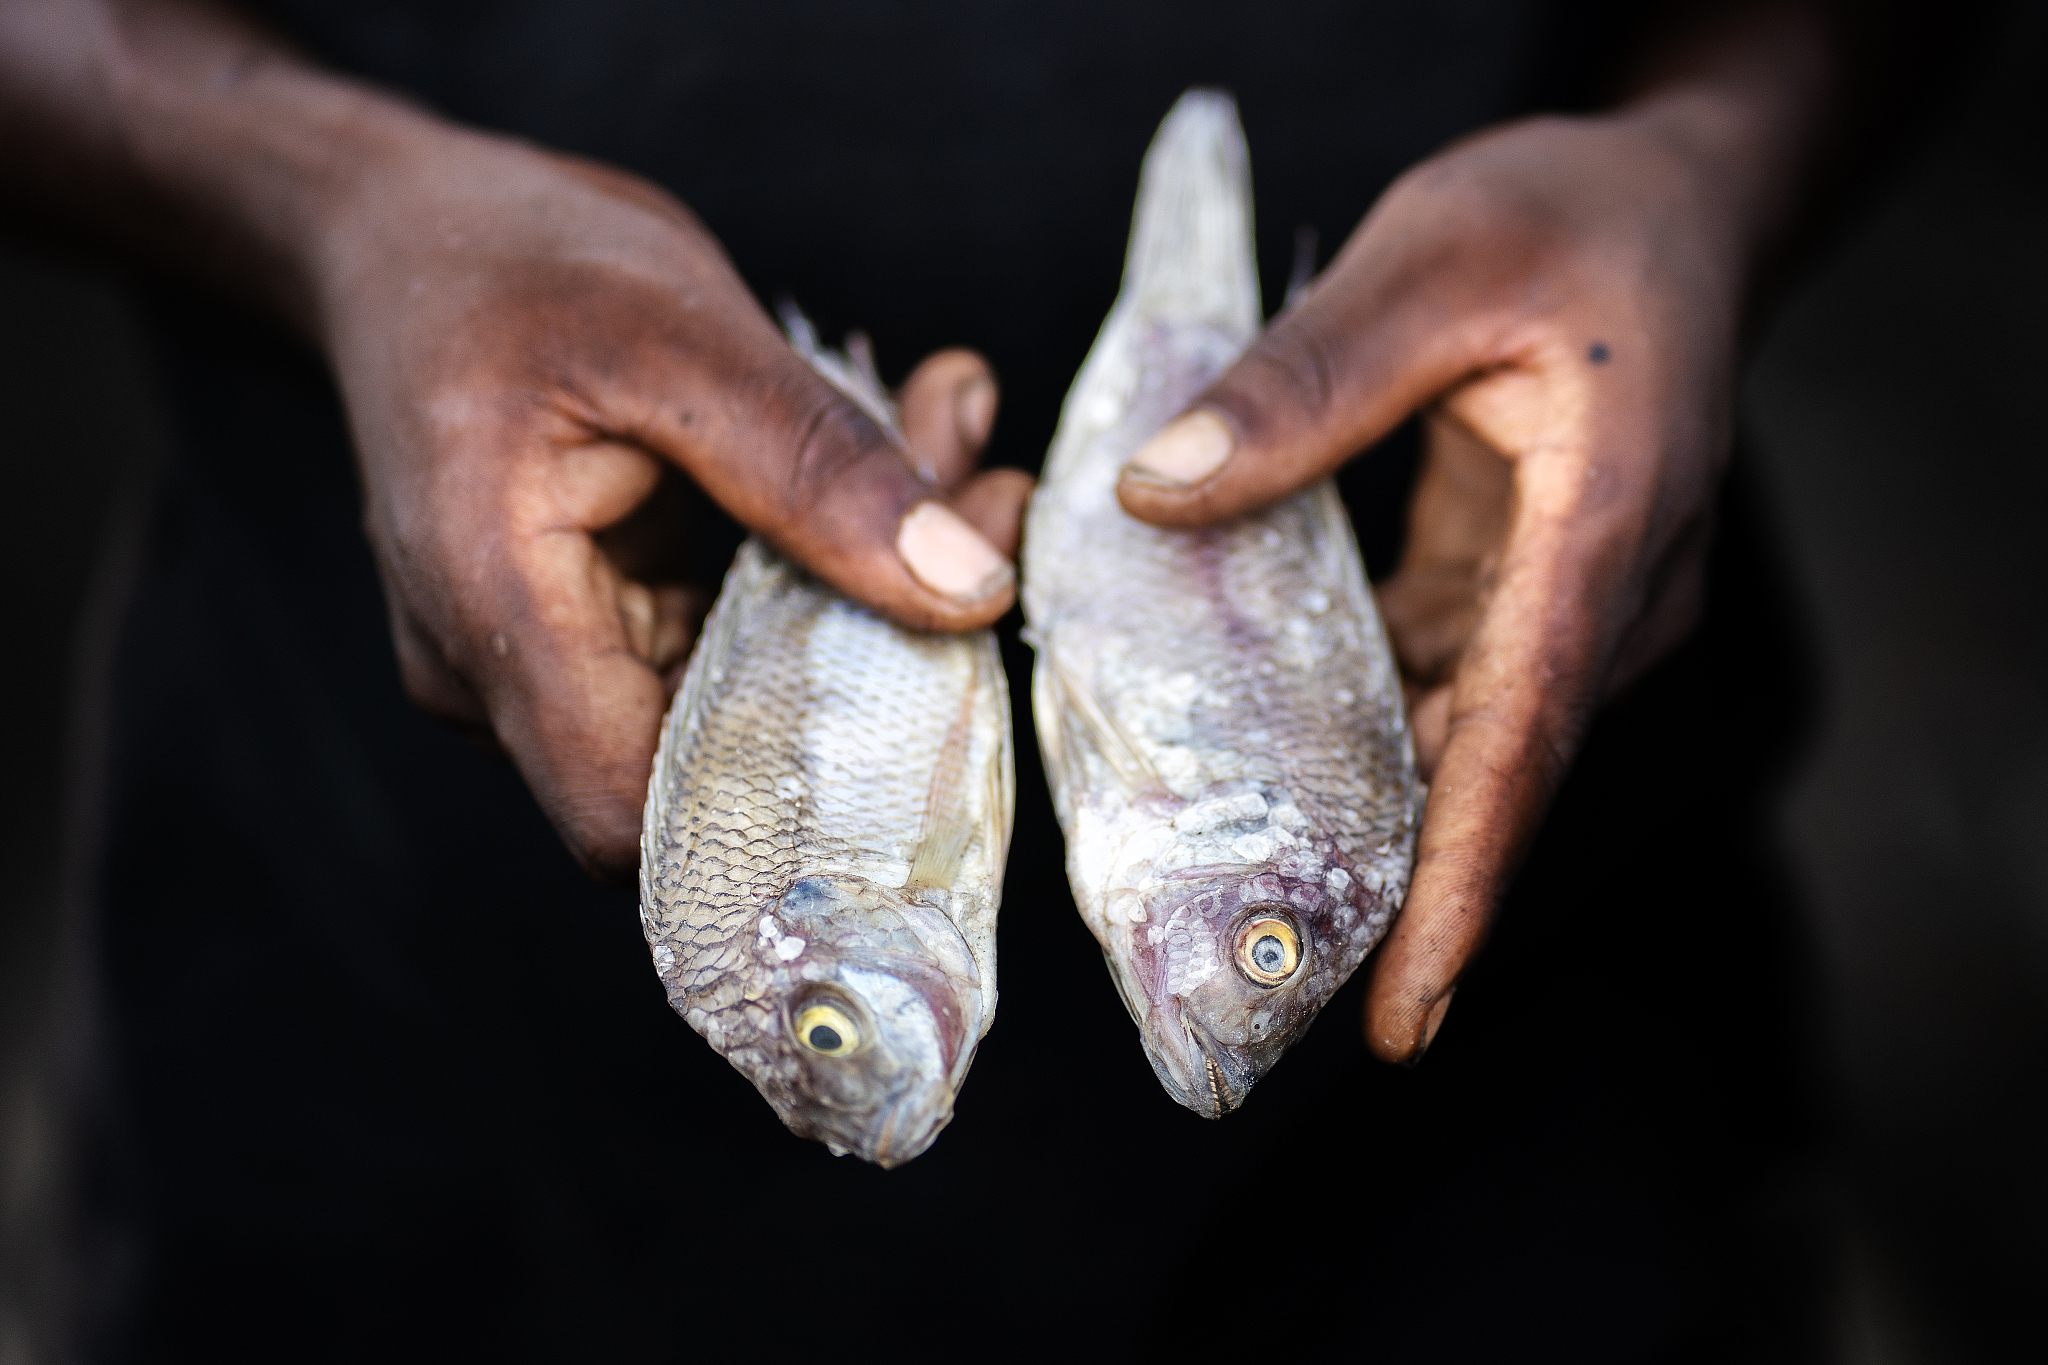 A man displays fish on the shores of Lake Chilwa in the Machinga district of Malawi. In 2015, the Lake Chilwa in Malawi completely dried out because of climate change, which led to the loss of most species of fish, putting more pressure on another vital food source. /CFP